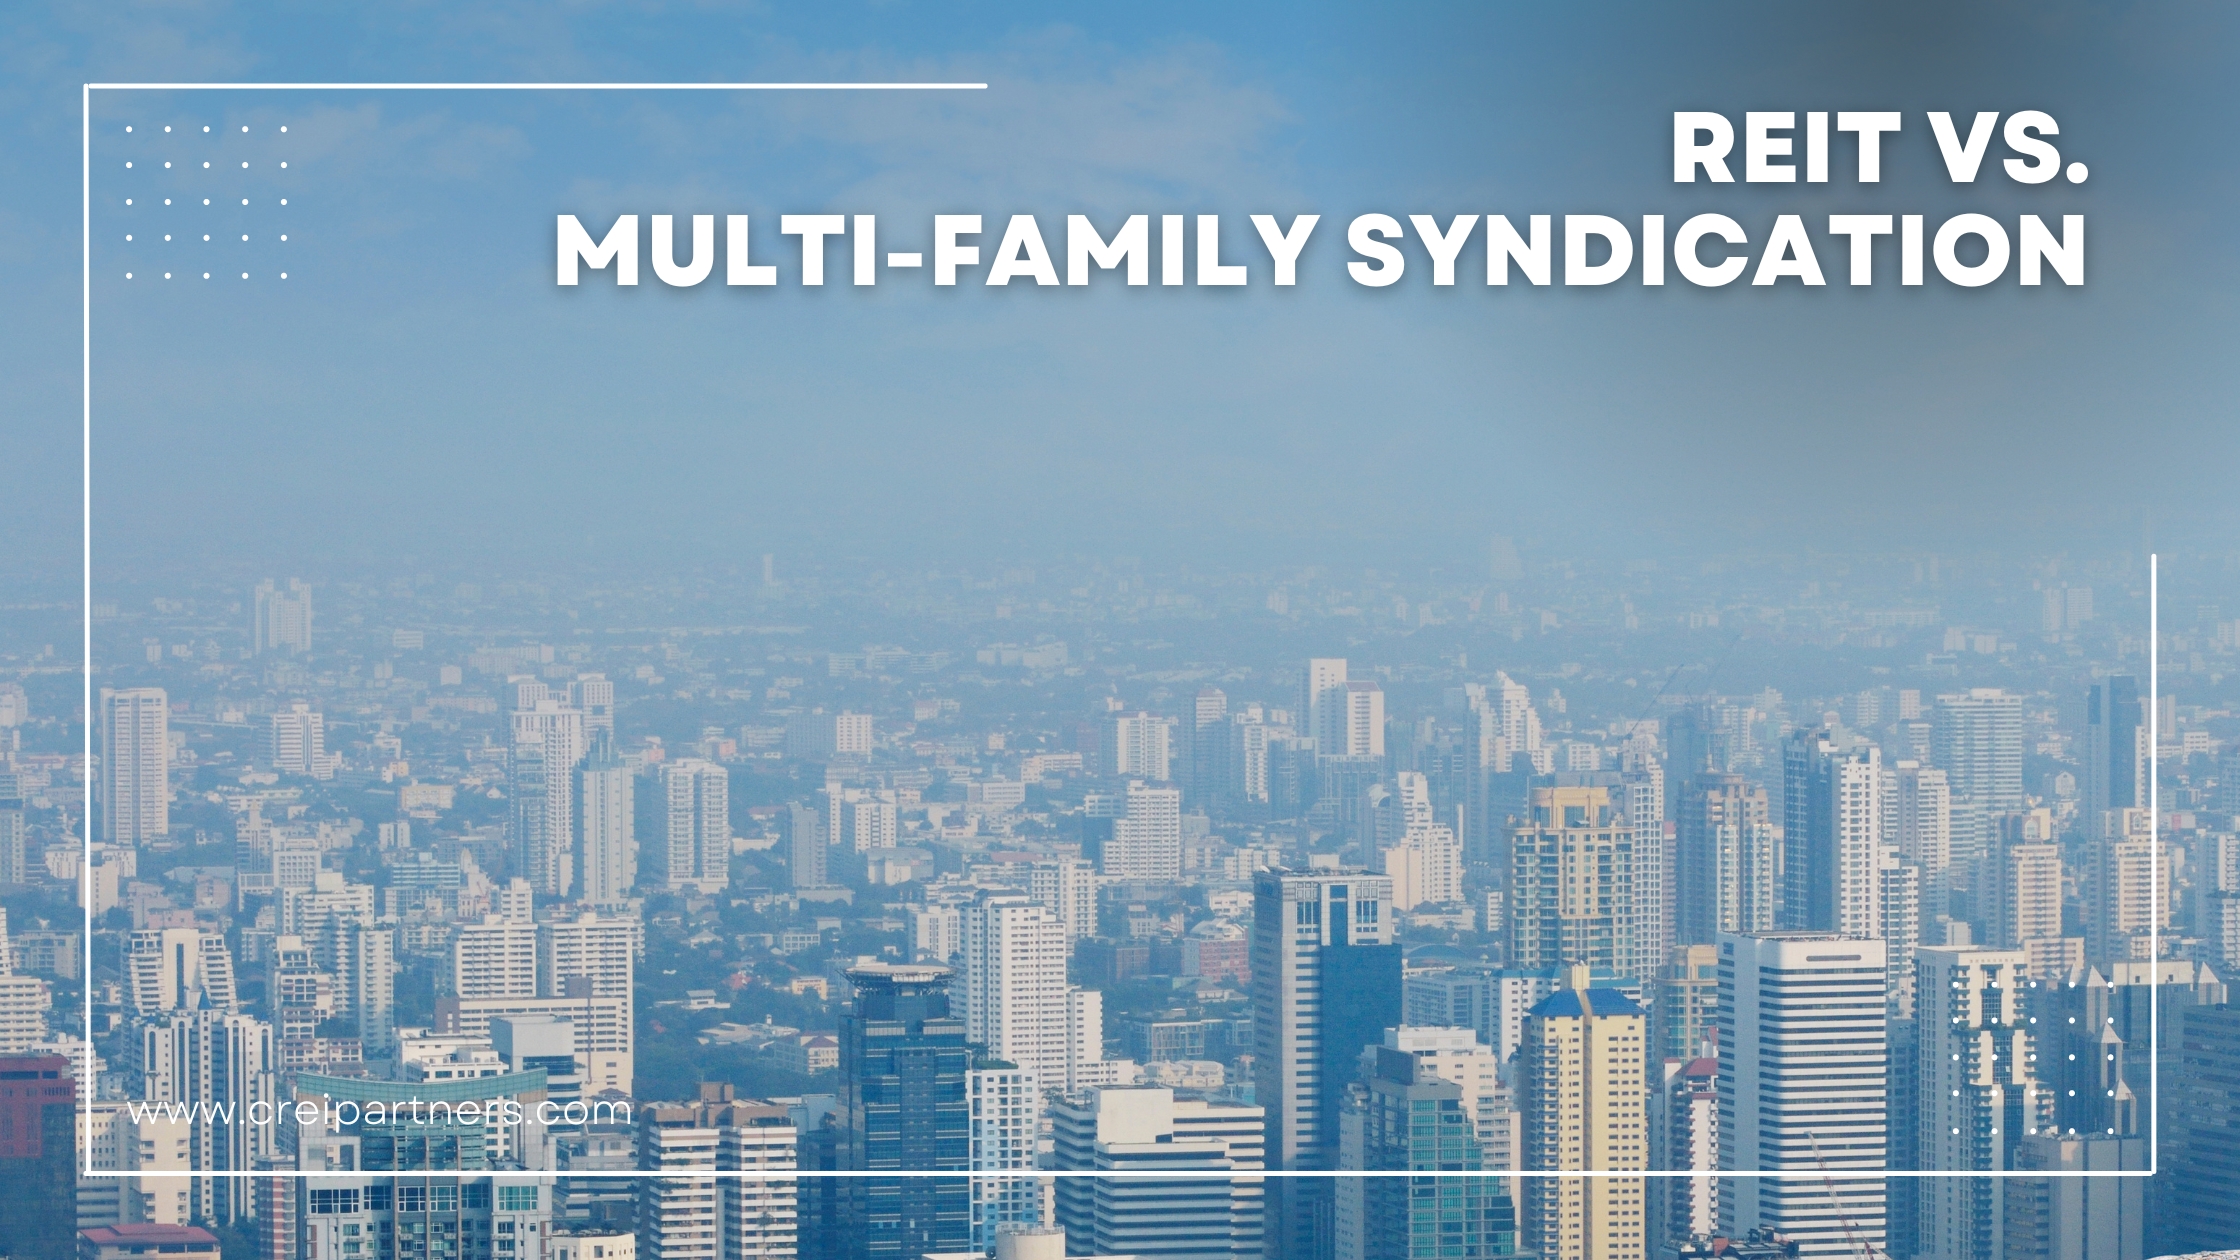 What are the differences between REITs and Multi-Family Syndications?